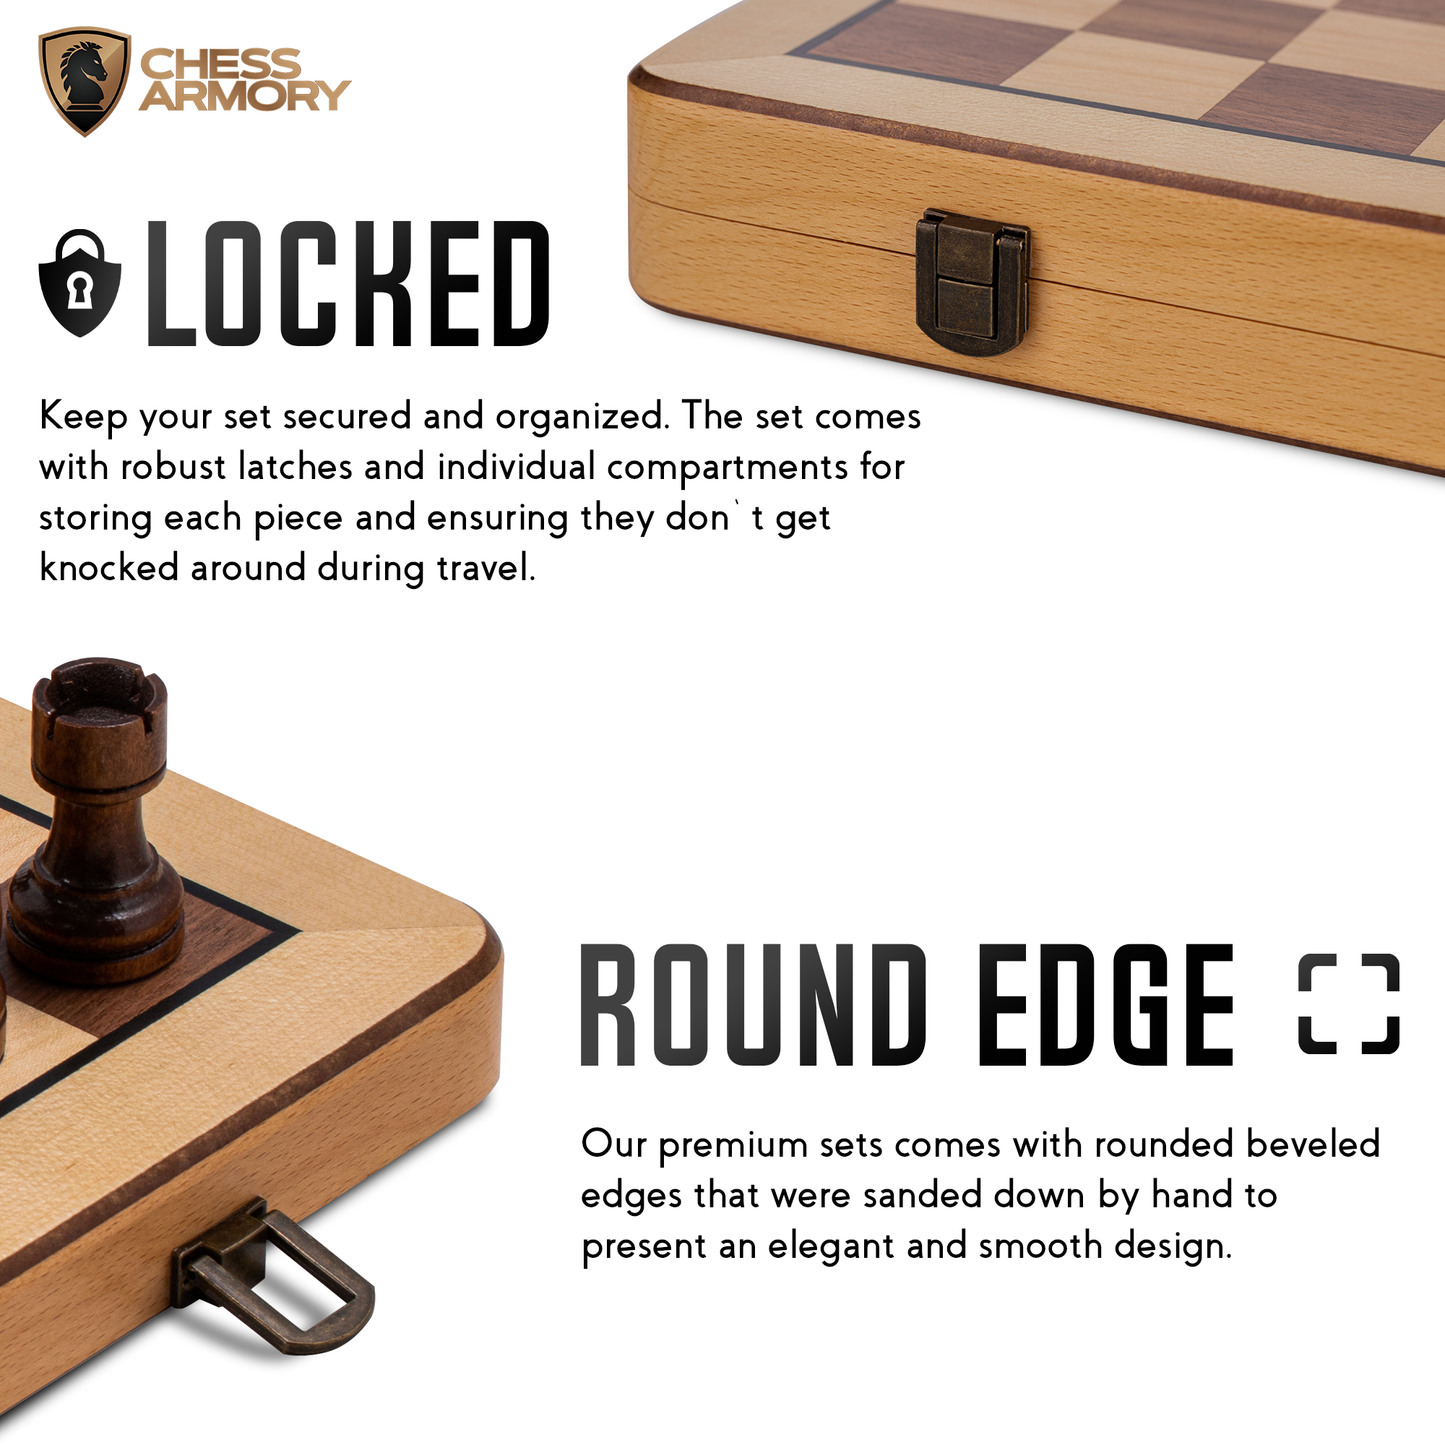 Chess Armory Premium Chess Set (Beech Wood) - Wooden Board Game with a Portable Wood Case and Secure Storage for Pieces, Set for Kids and Adults